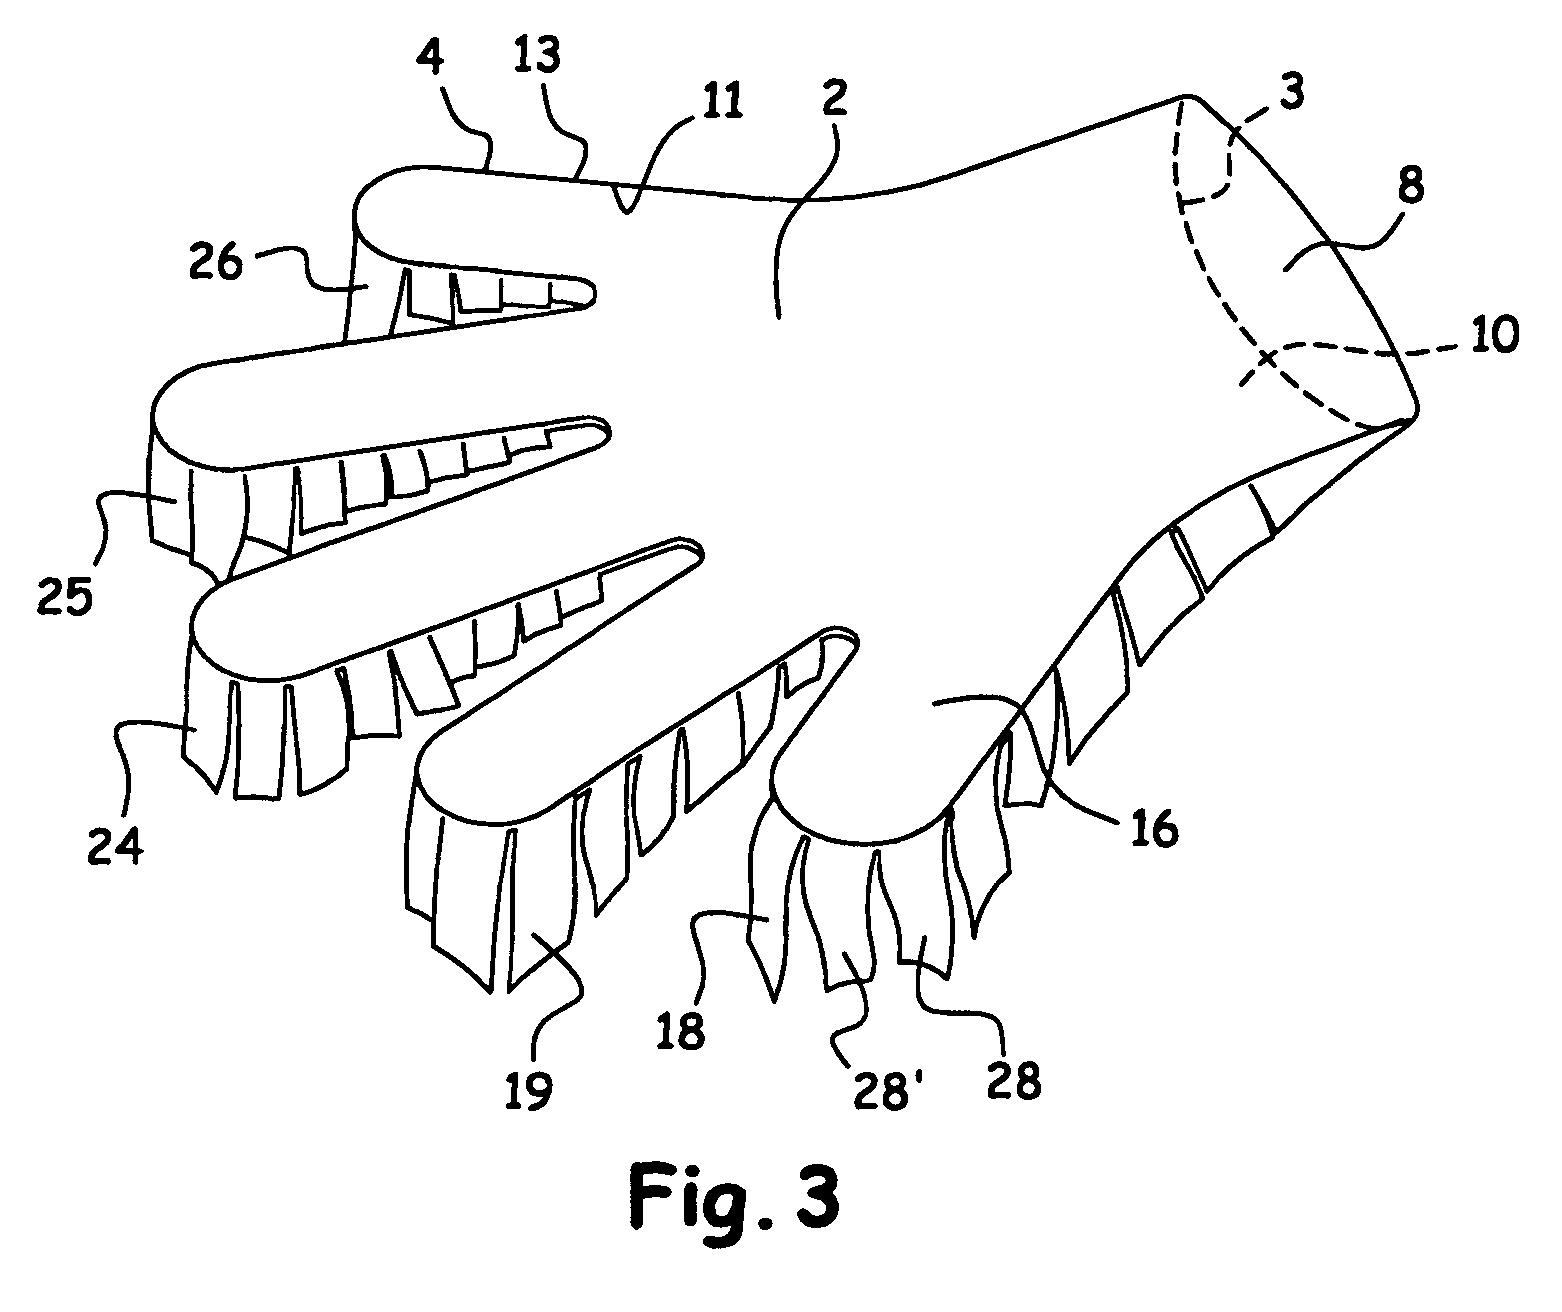 Applicator structure in the form of a glove